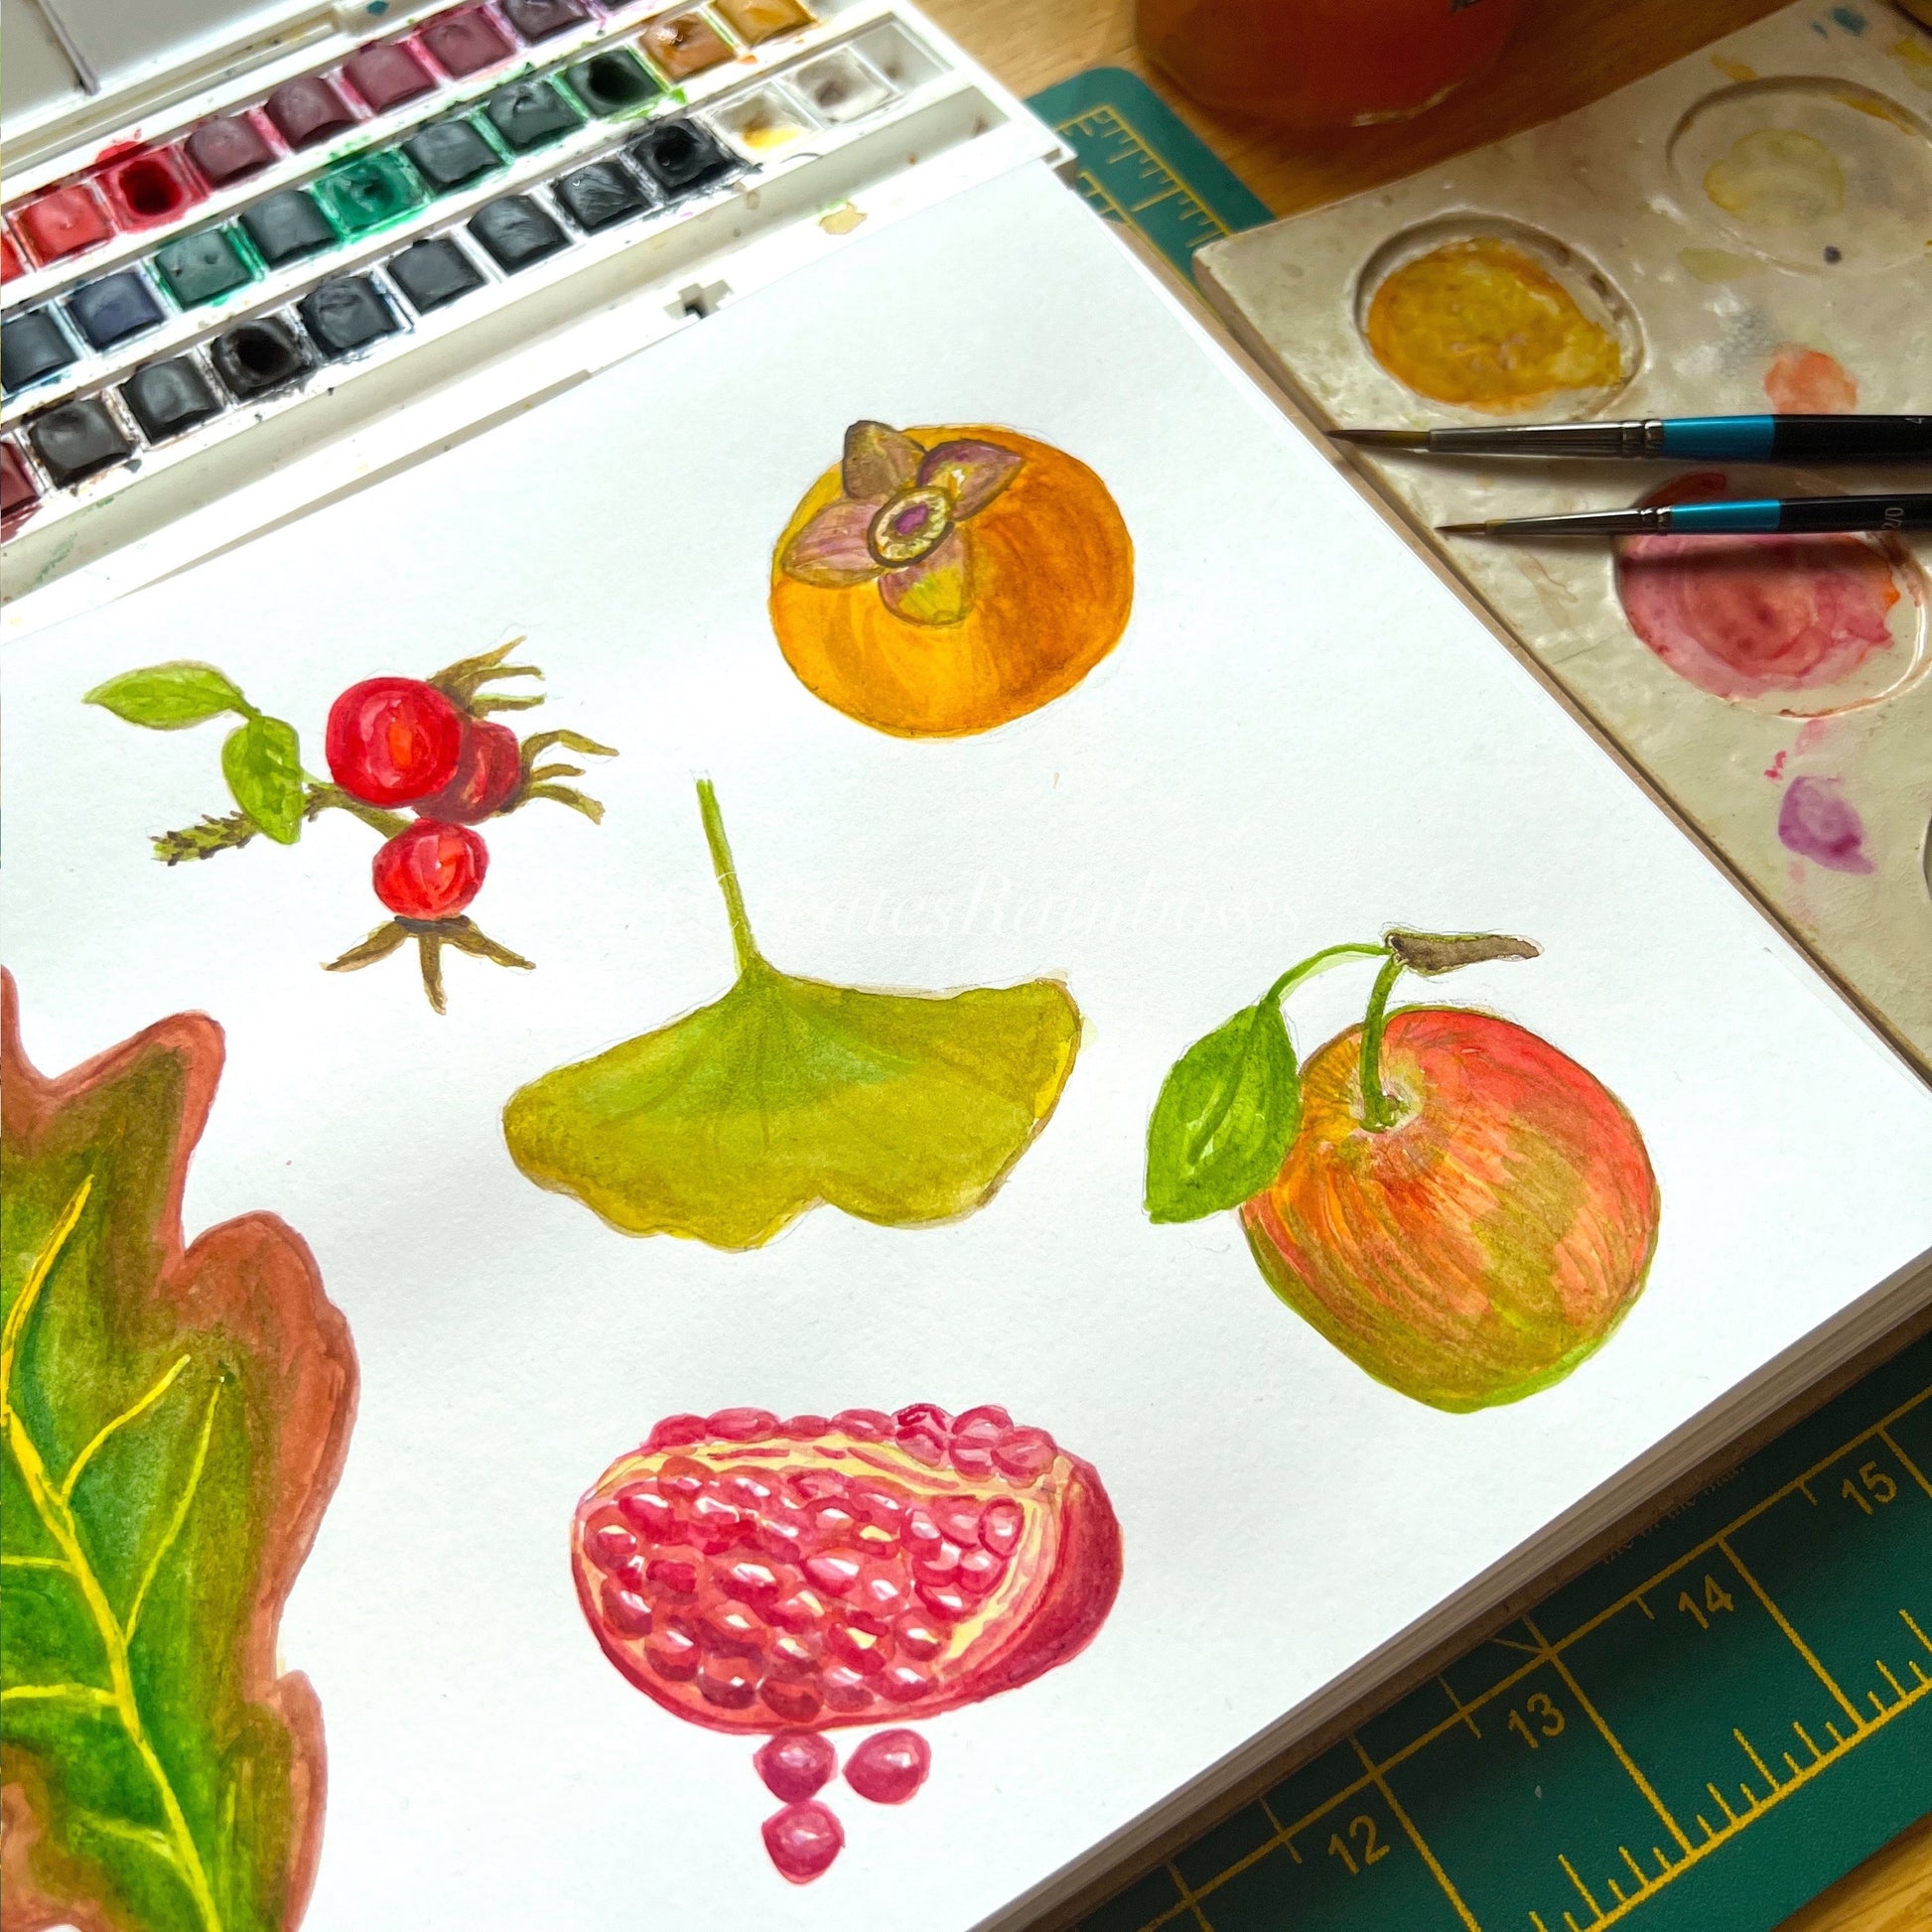 Original watercolour paintings of autumnal fruits and botanicals by Kat Lovatt